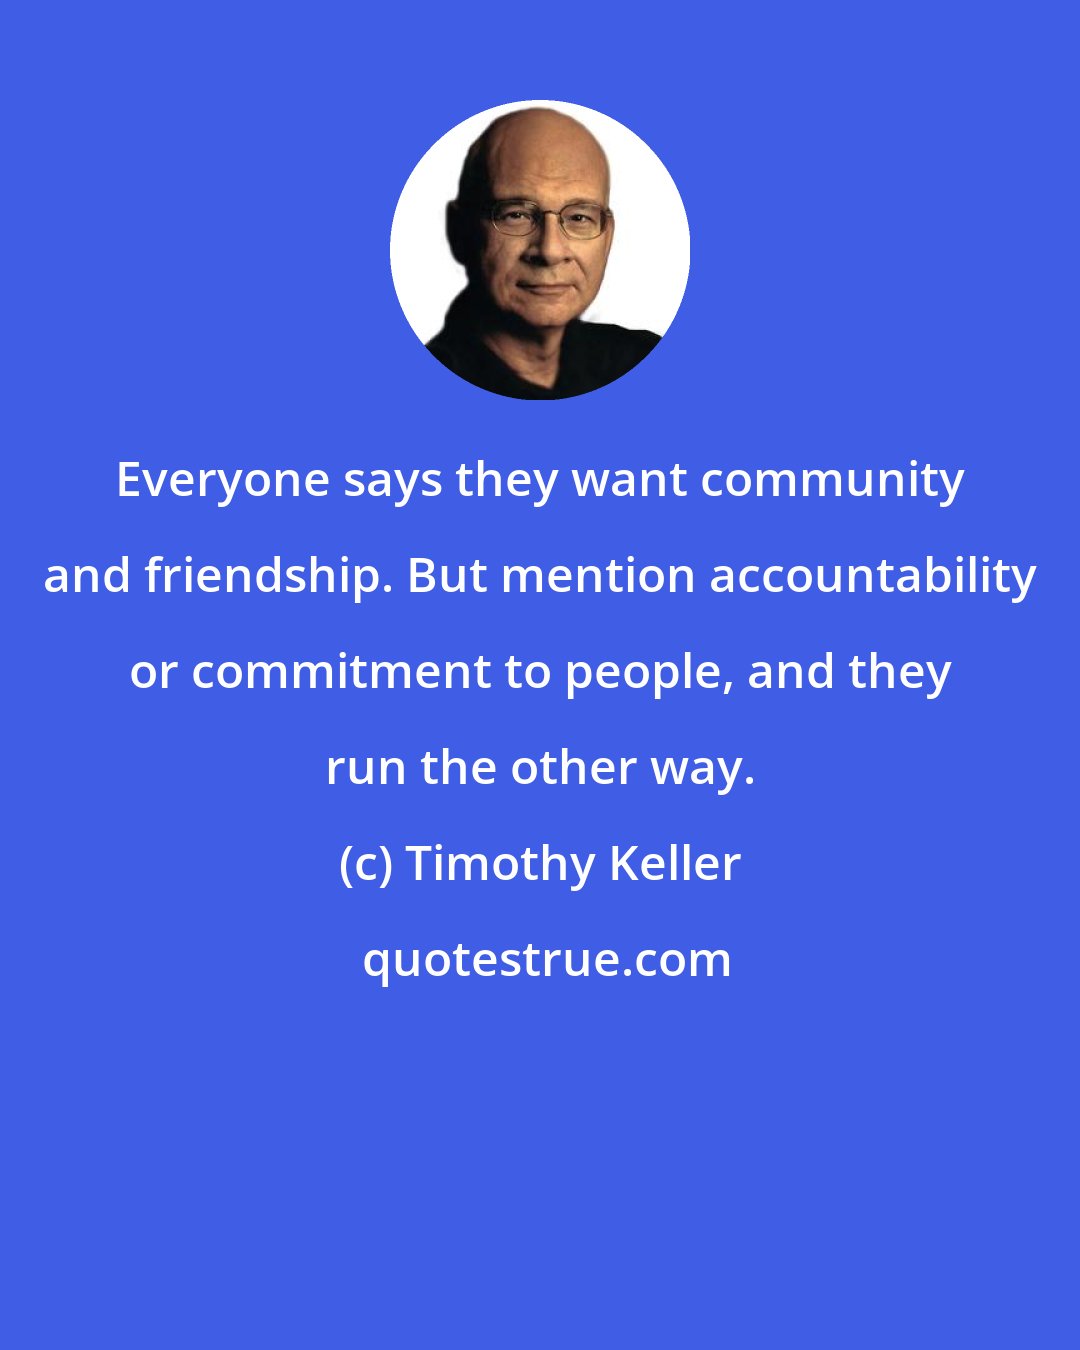 Timothy Keller: Everyone says they want community and friendship. But mention accountability or commitment to people, and they run the other way.